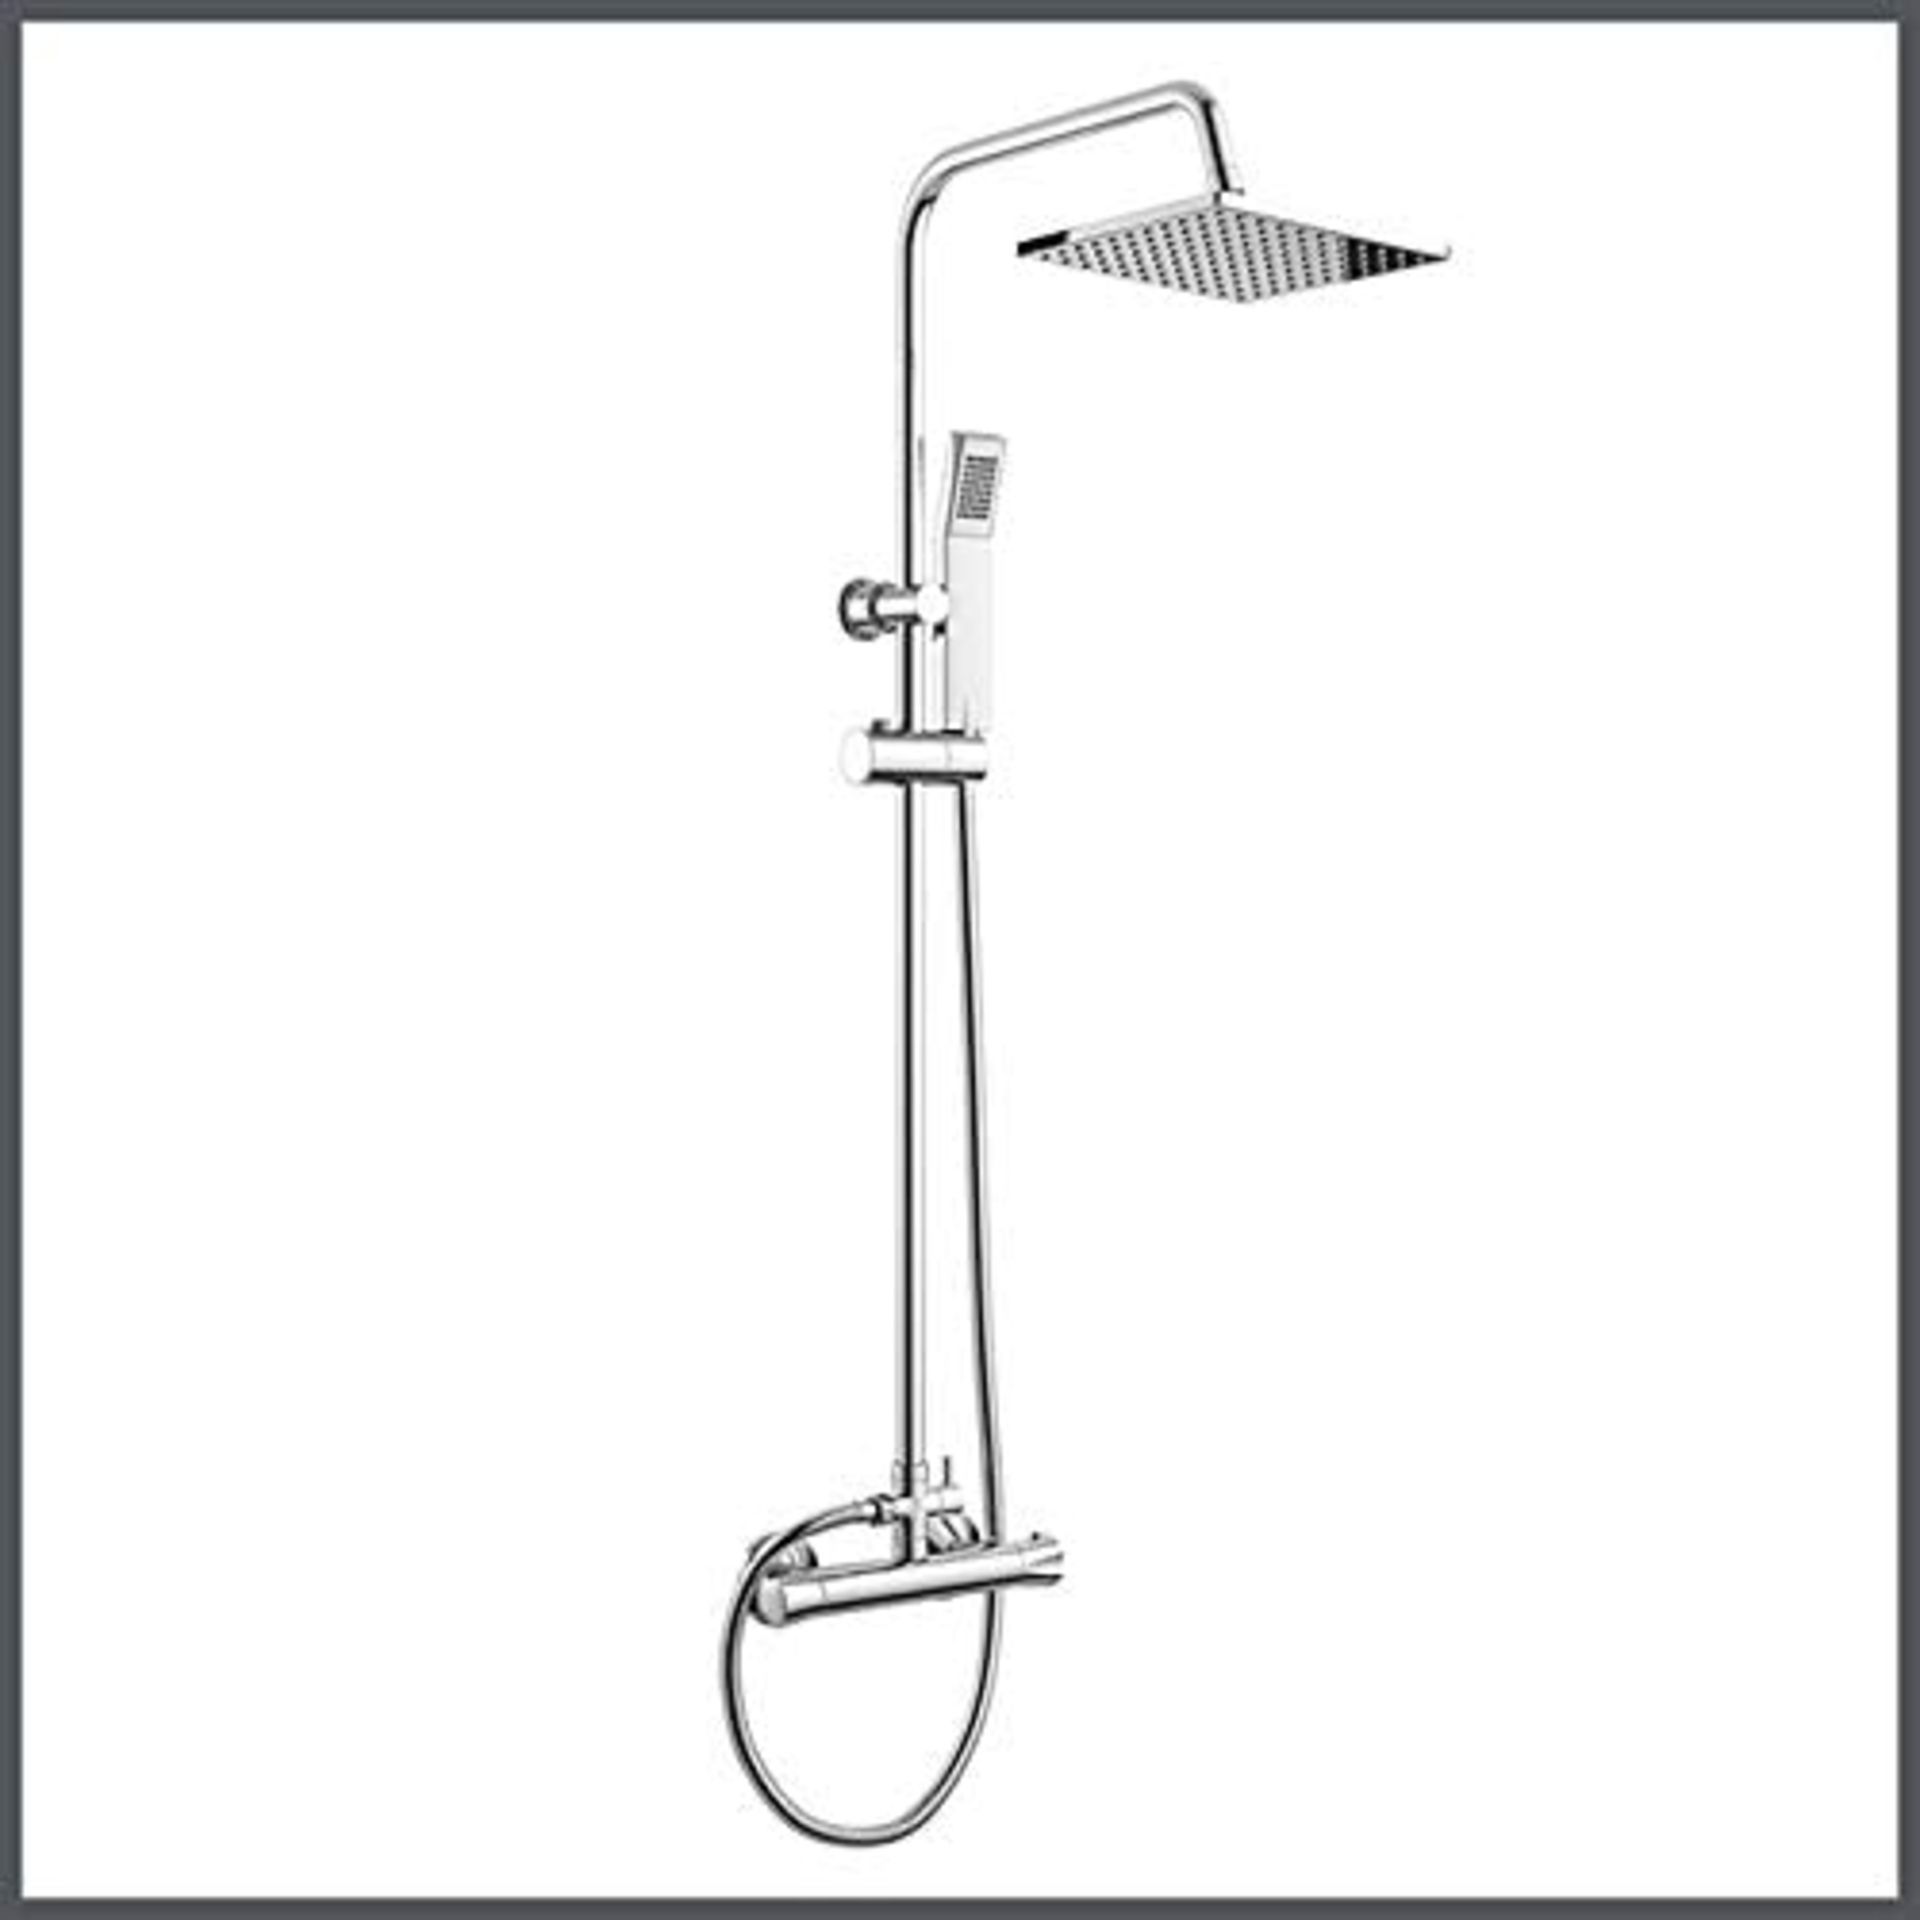 New & Boxed Exposed Thermostatic 2-Way Bar Mixer Shower Set Chrome Valve 200mm Square Head + Ha... - Image 2 of 2